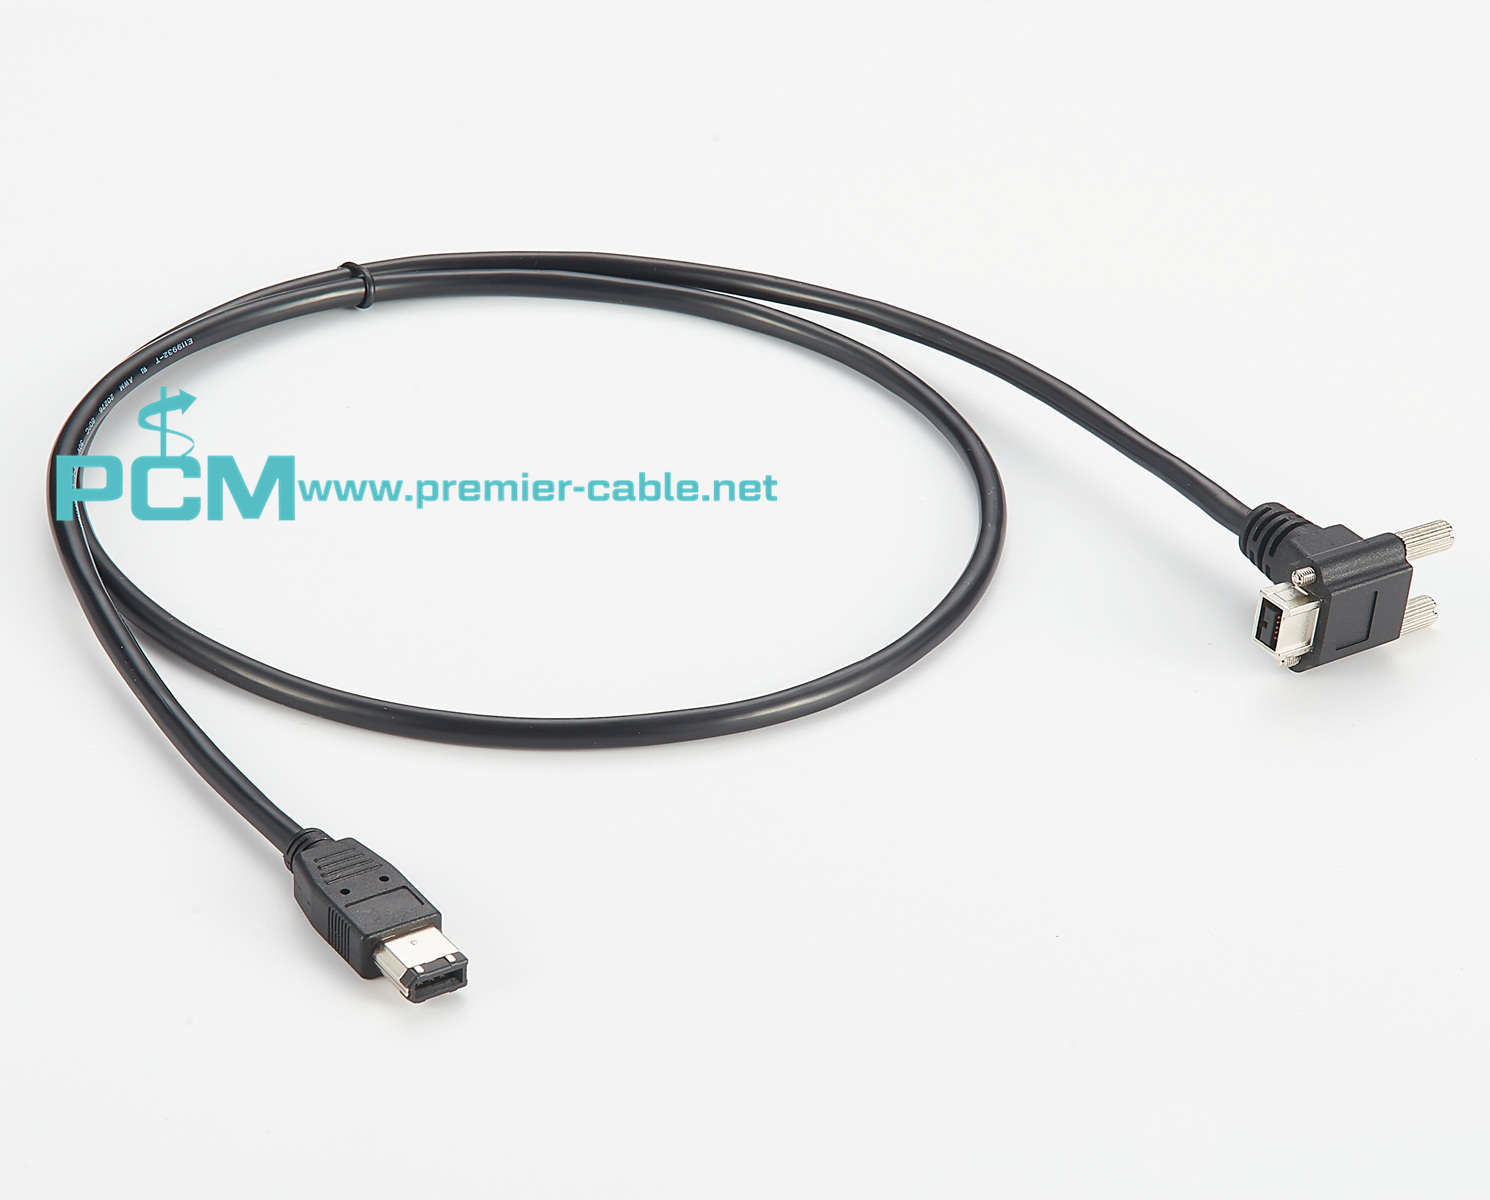 90 degree left angle 1394B firewire 800 cable